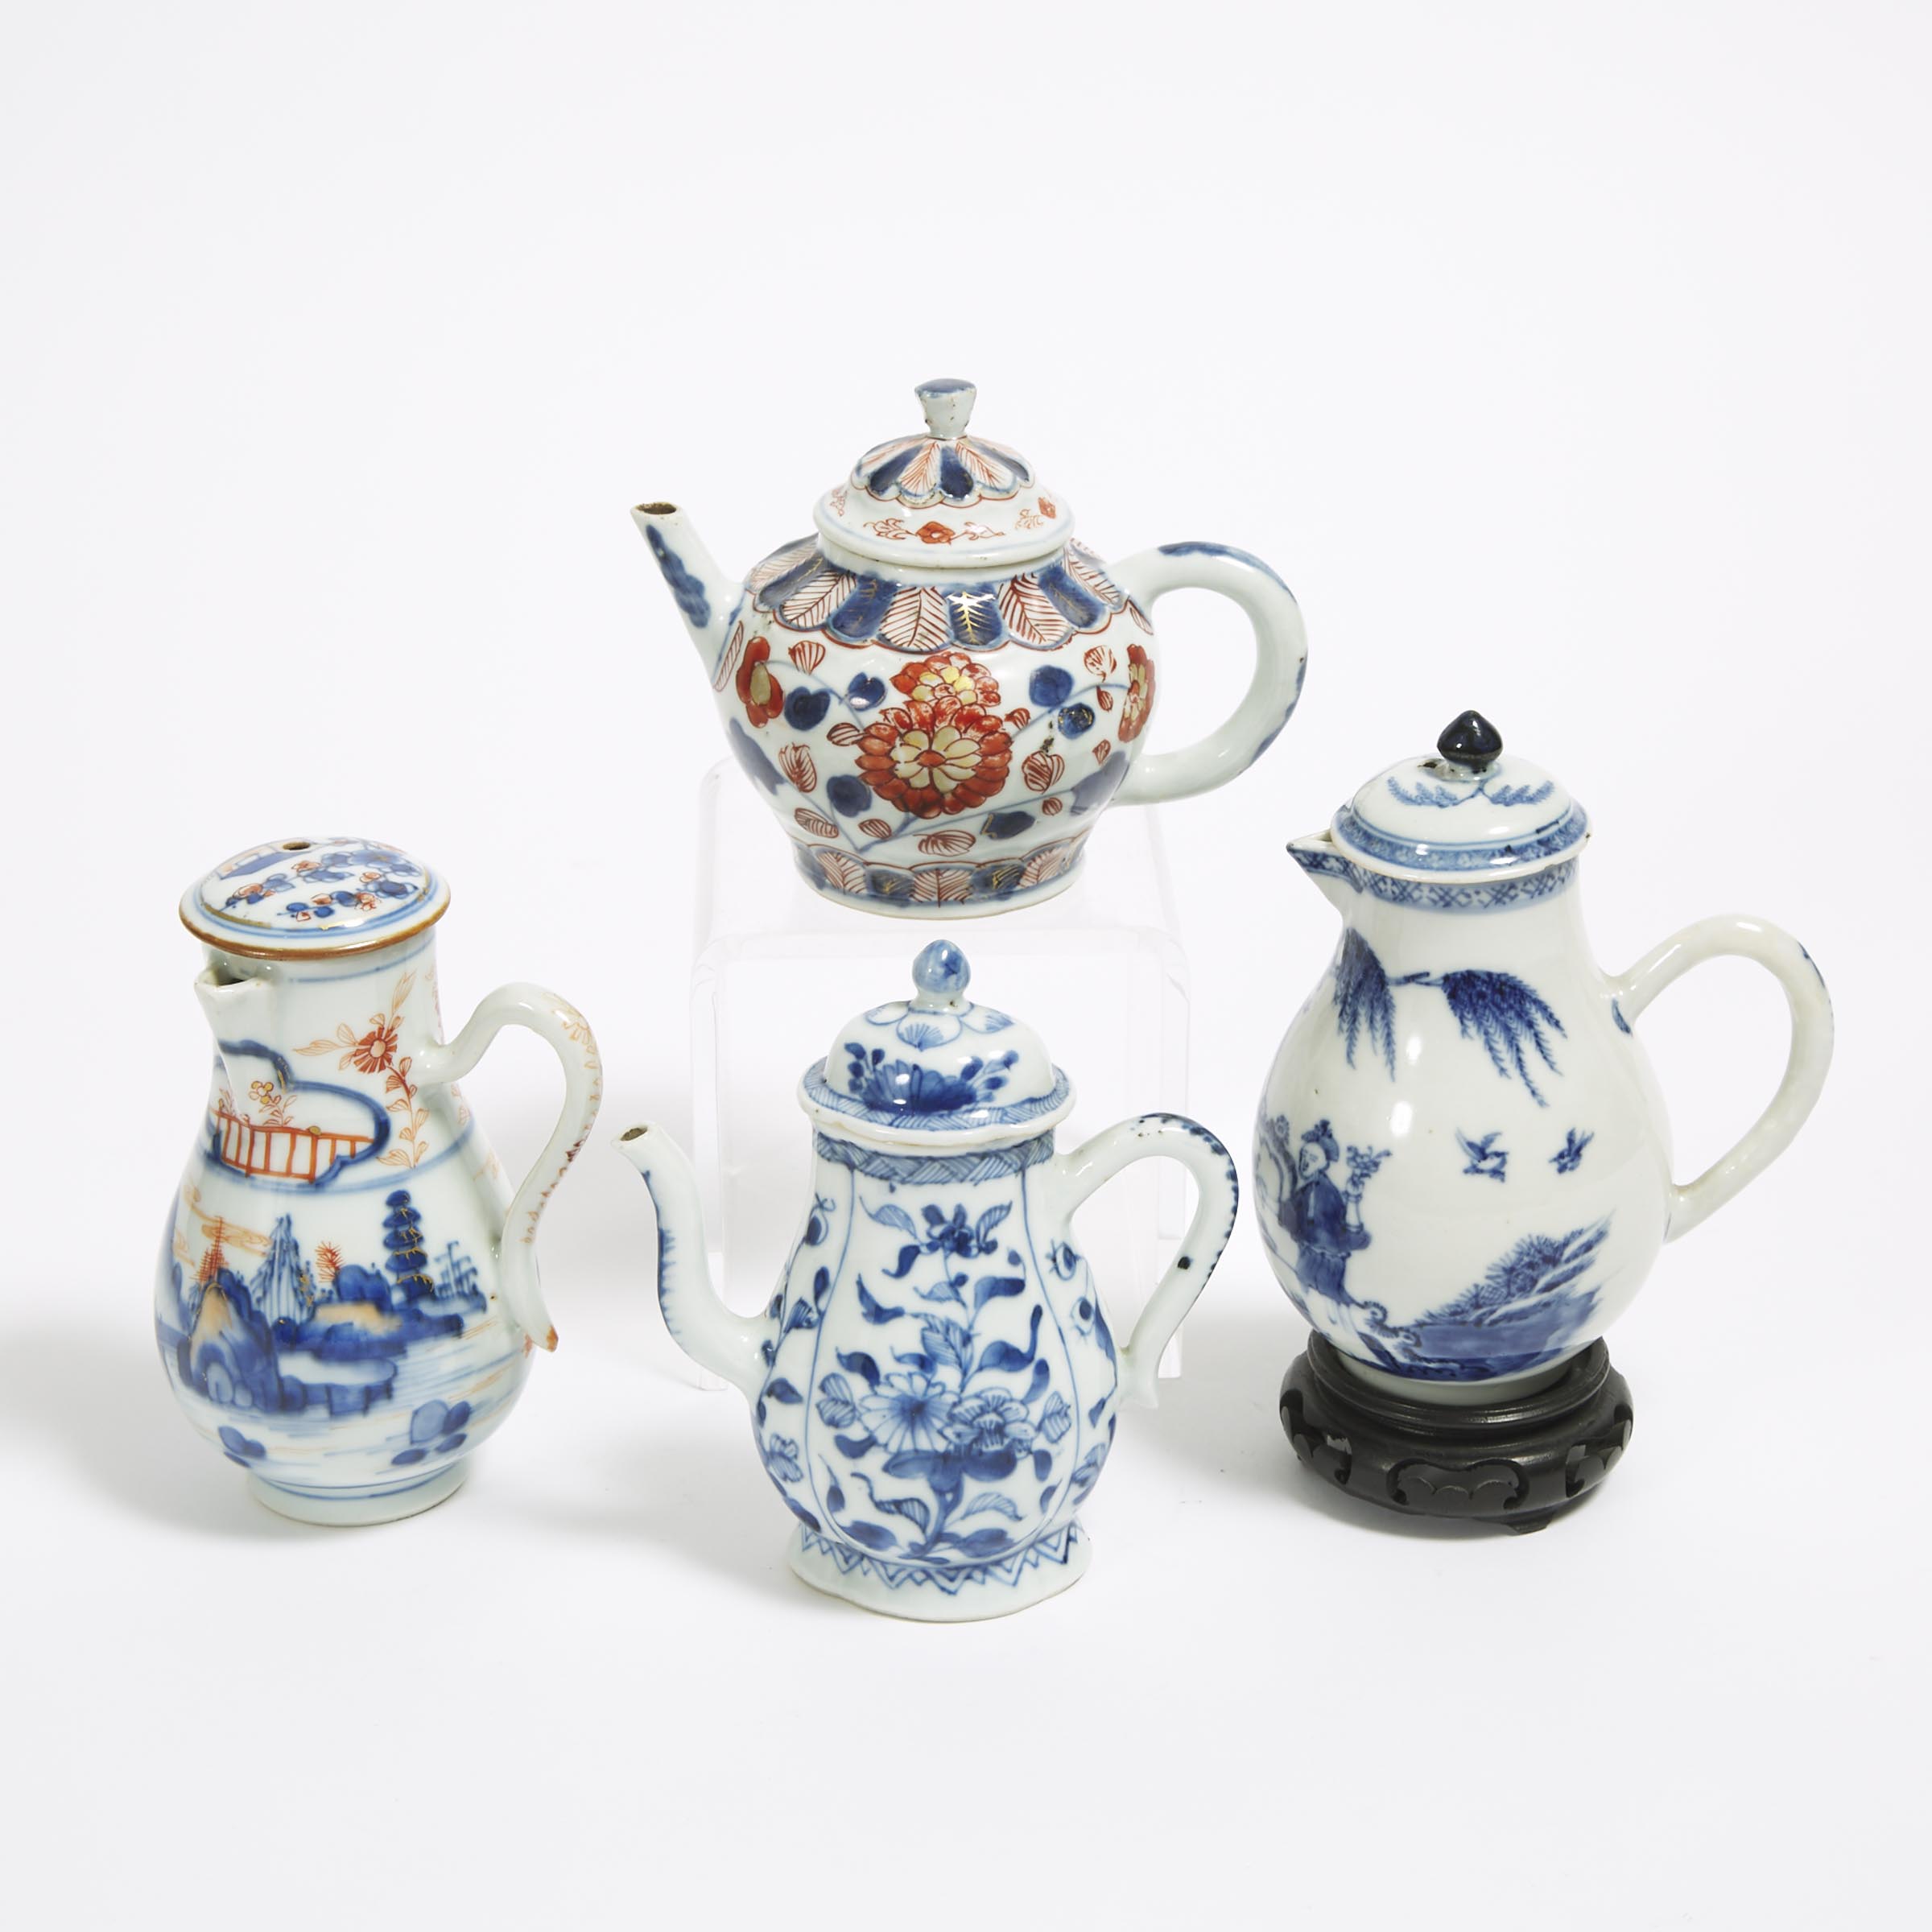 A Group of Four Blue and White Teapot and Creamers, 18th/19th Century